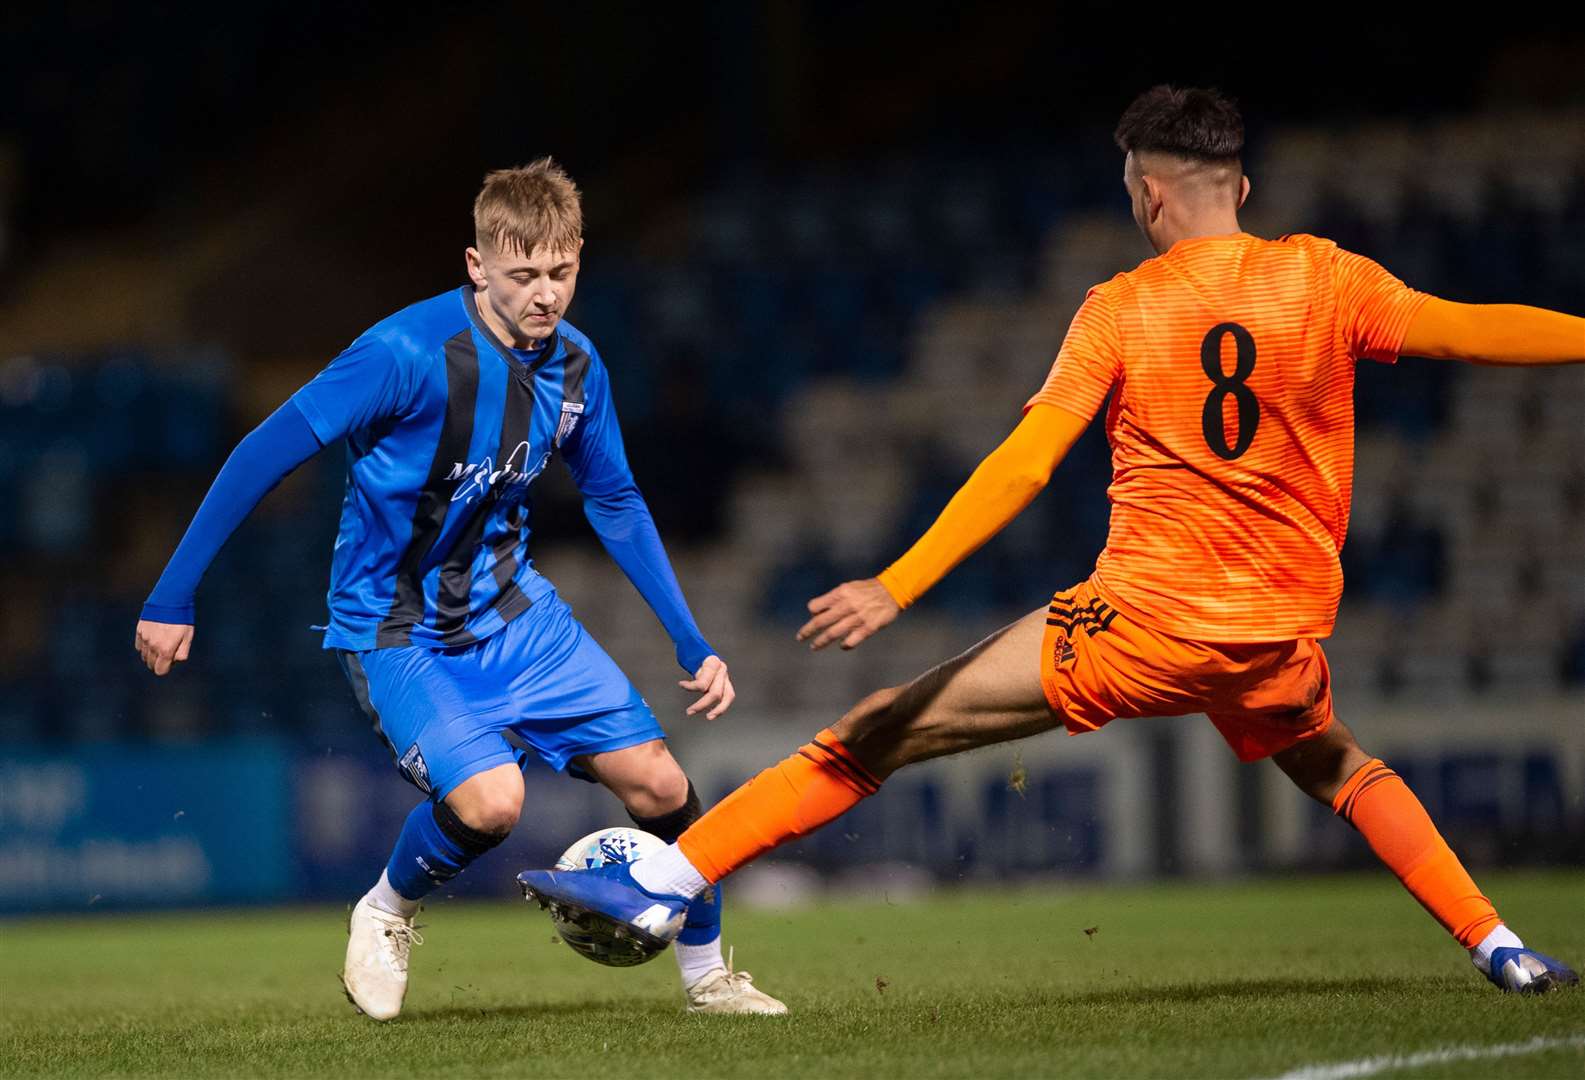 Jimmy Witt in action for the Gills during an FA Youth Cup match